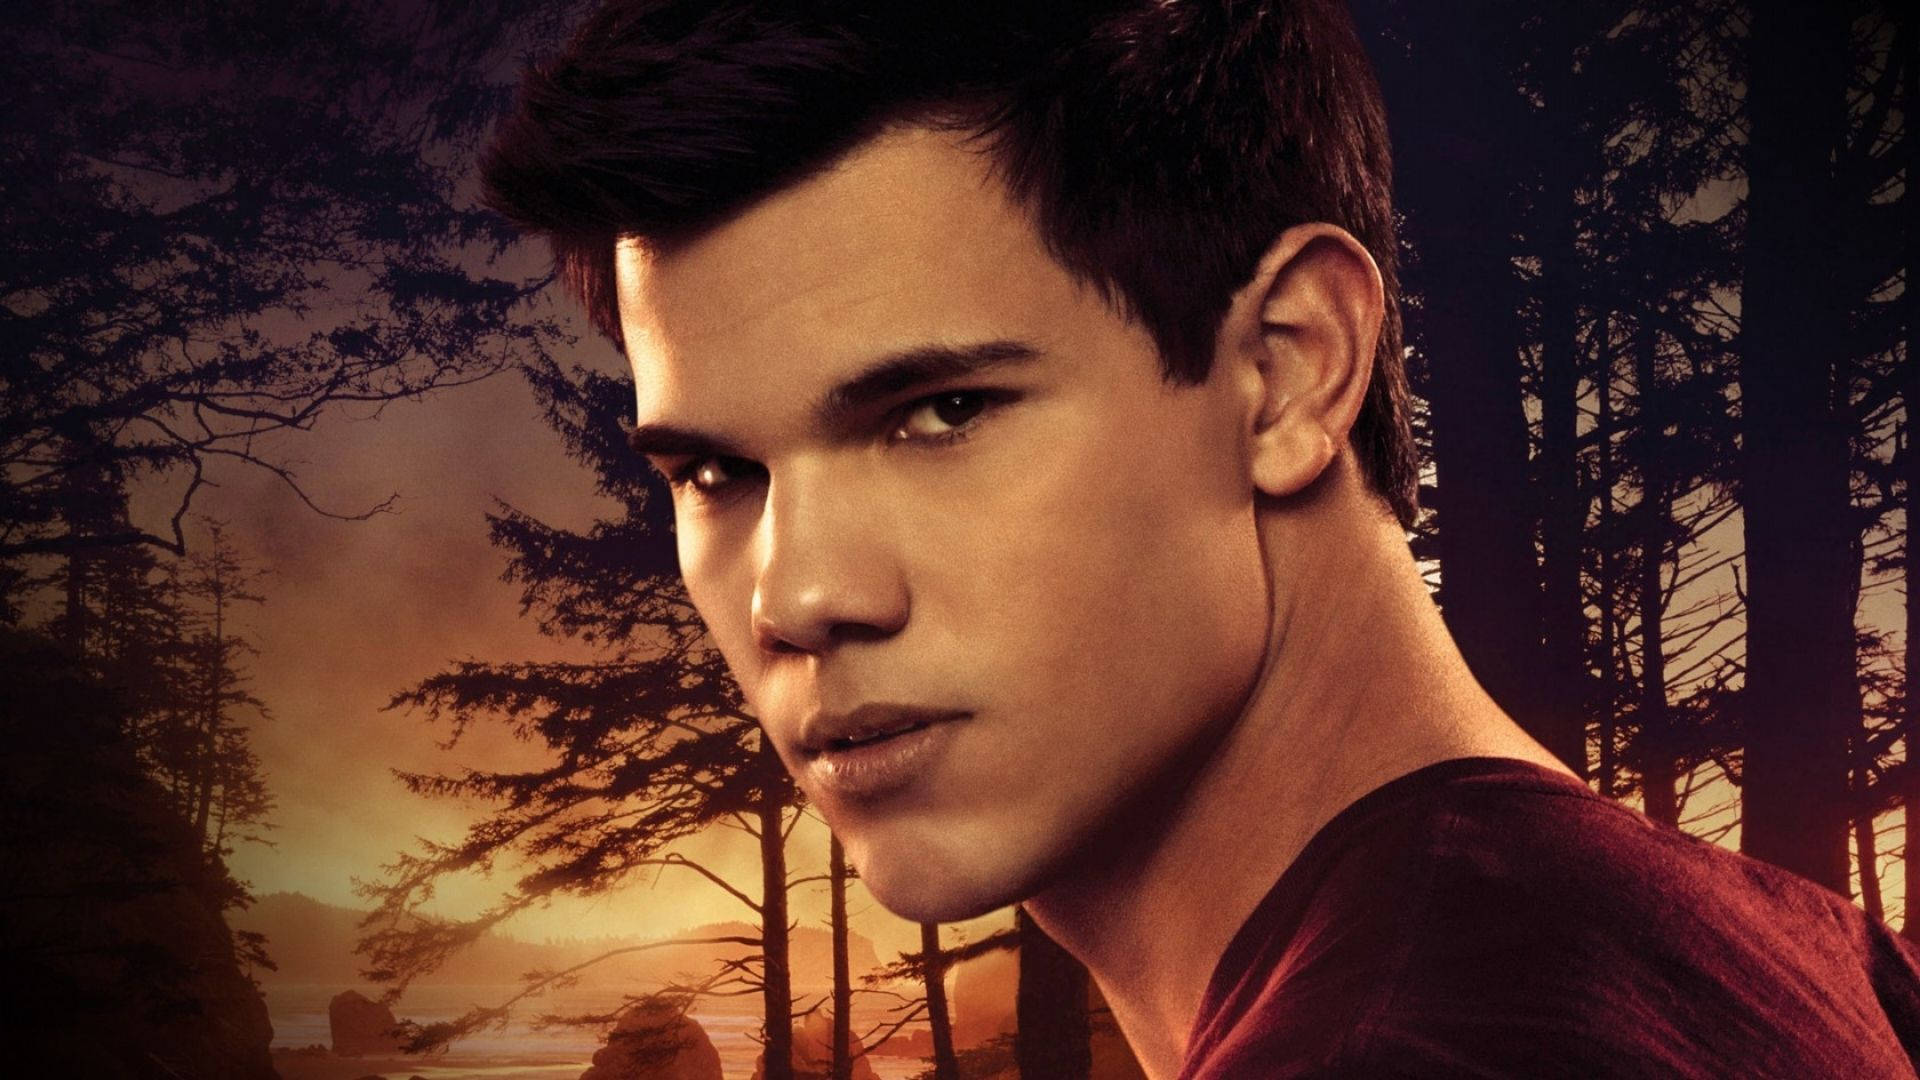 Hollywood Actor Taylor Lautner in Twilight Series Wallpaper